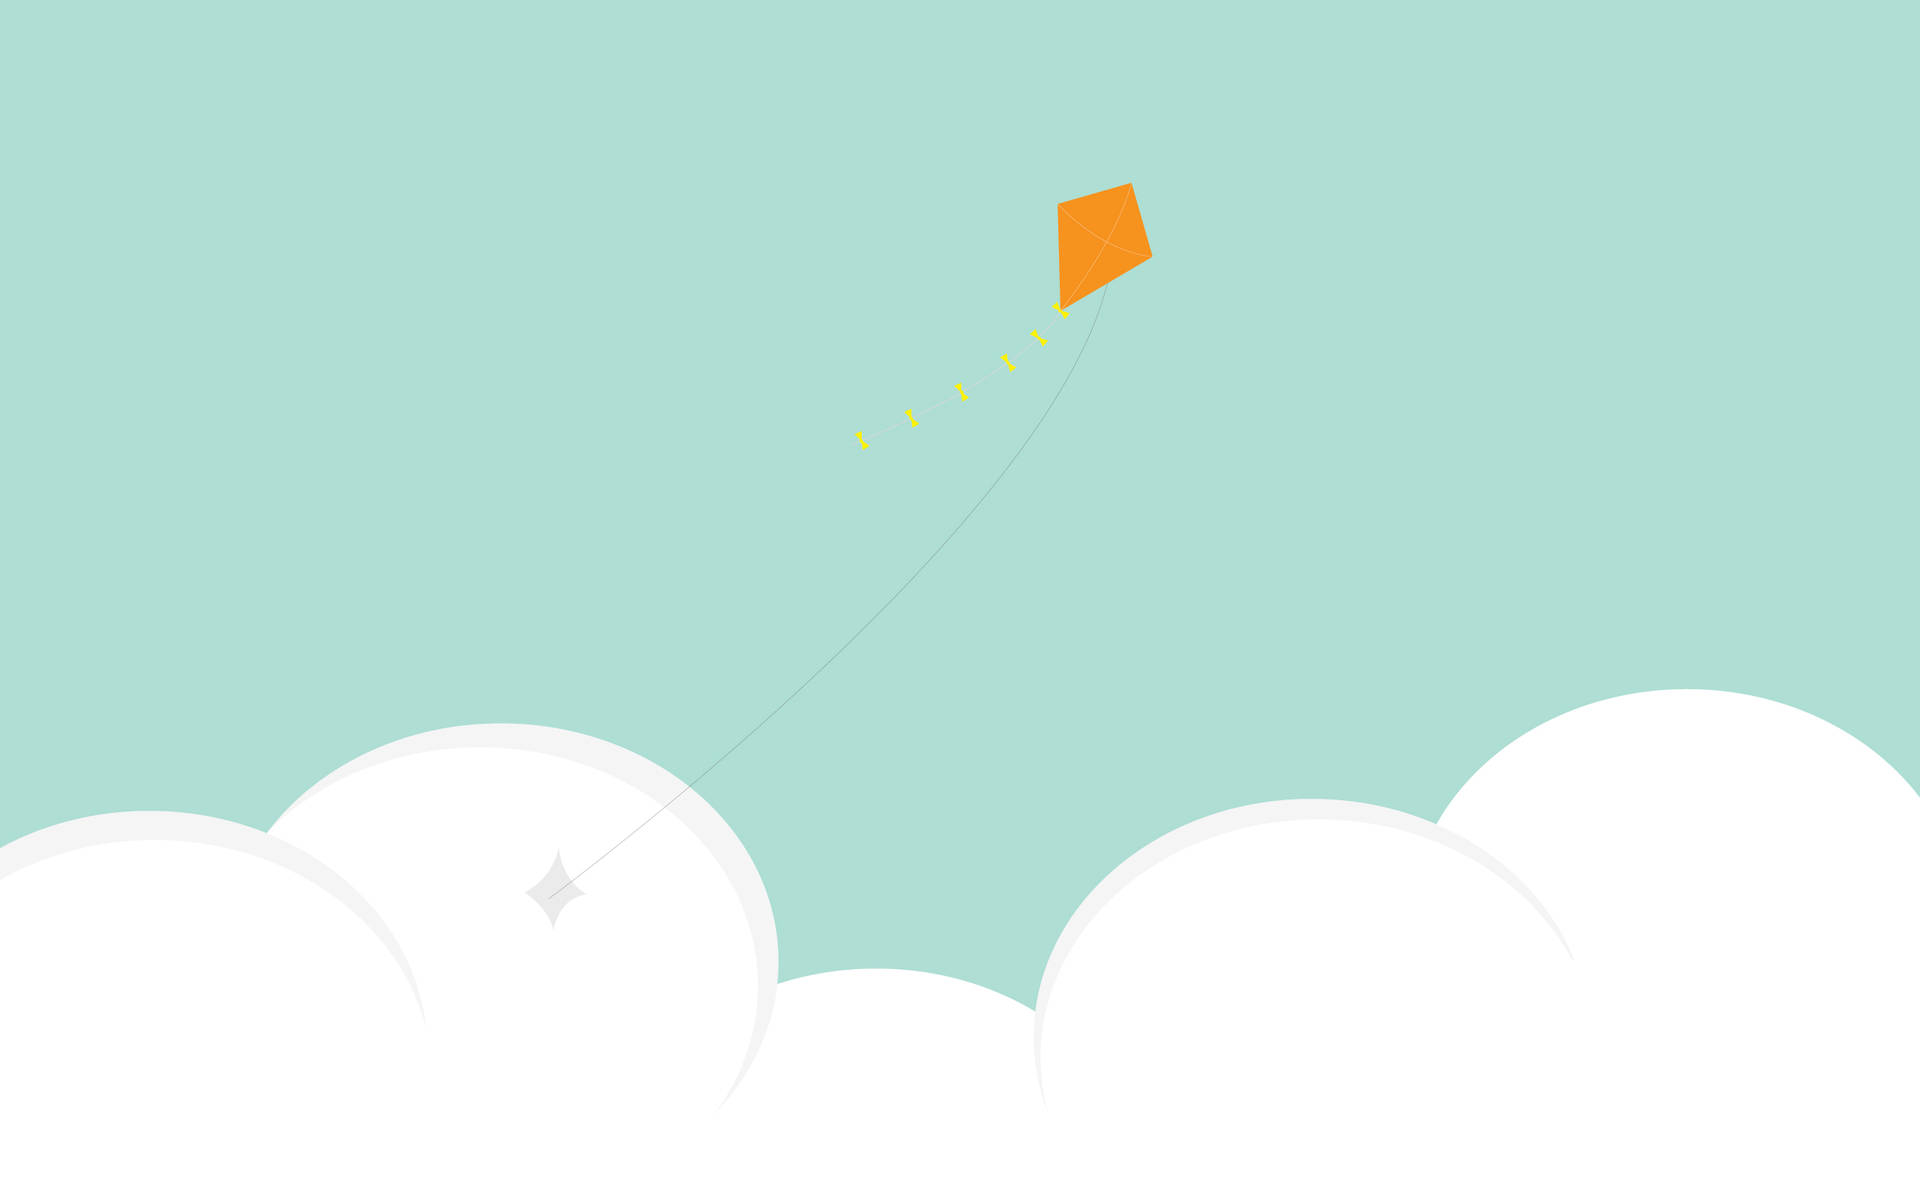 Bright and whimsical design featuring a kite in a background of white fluffy clouds Wallpaper